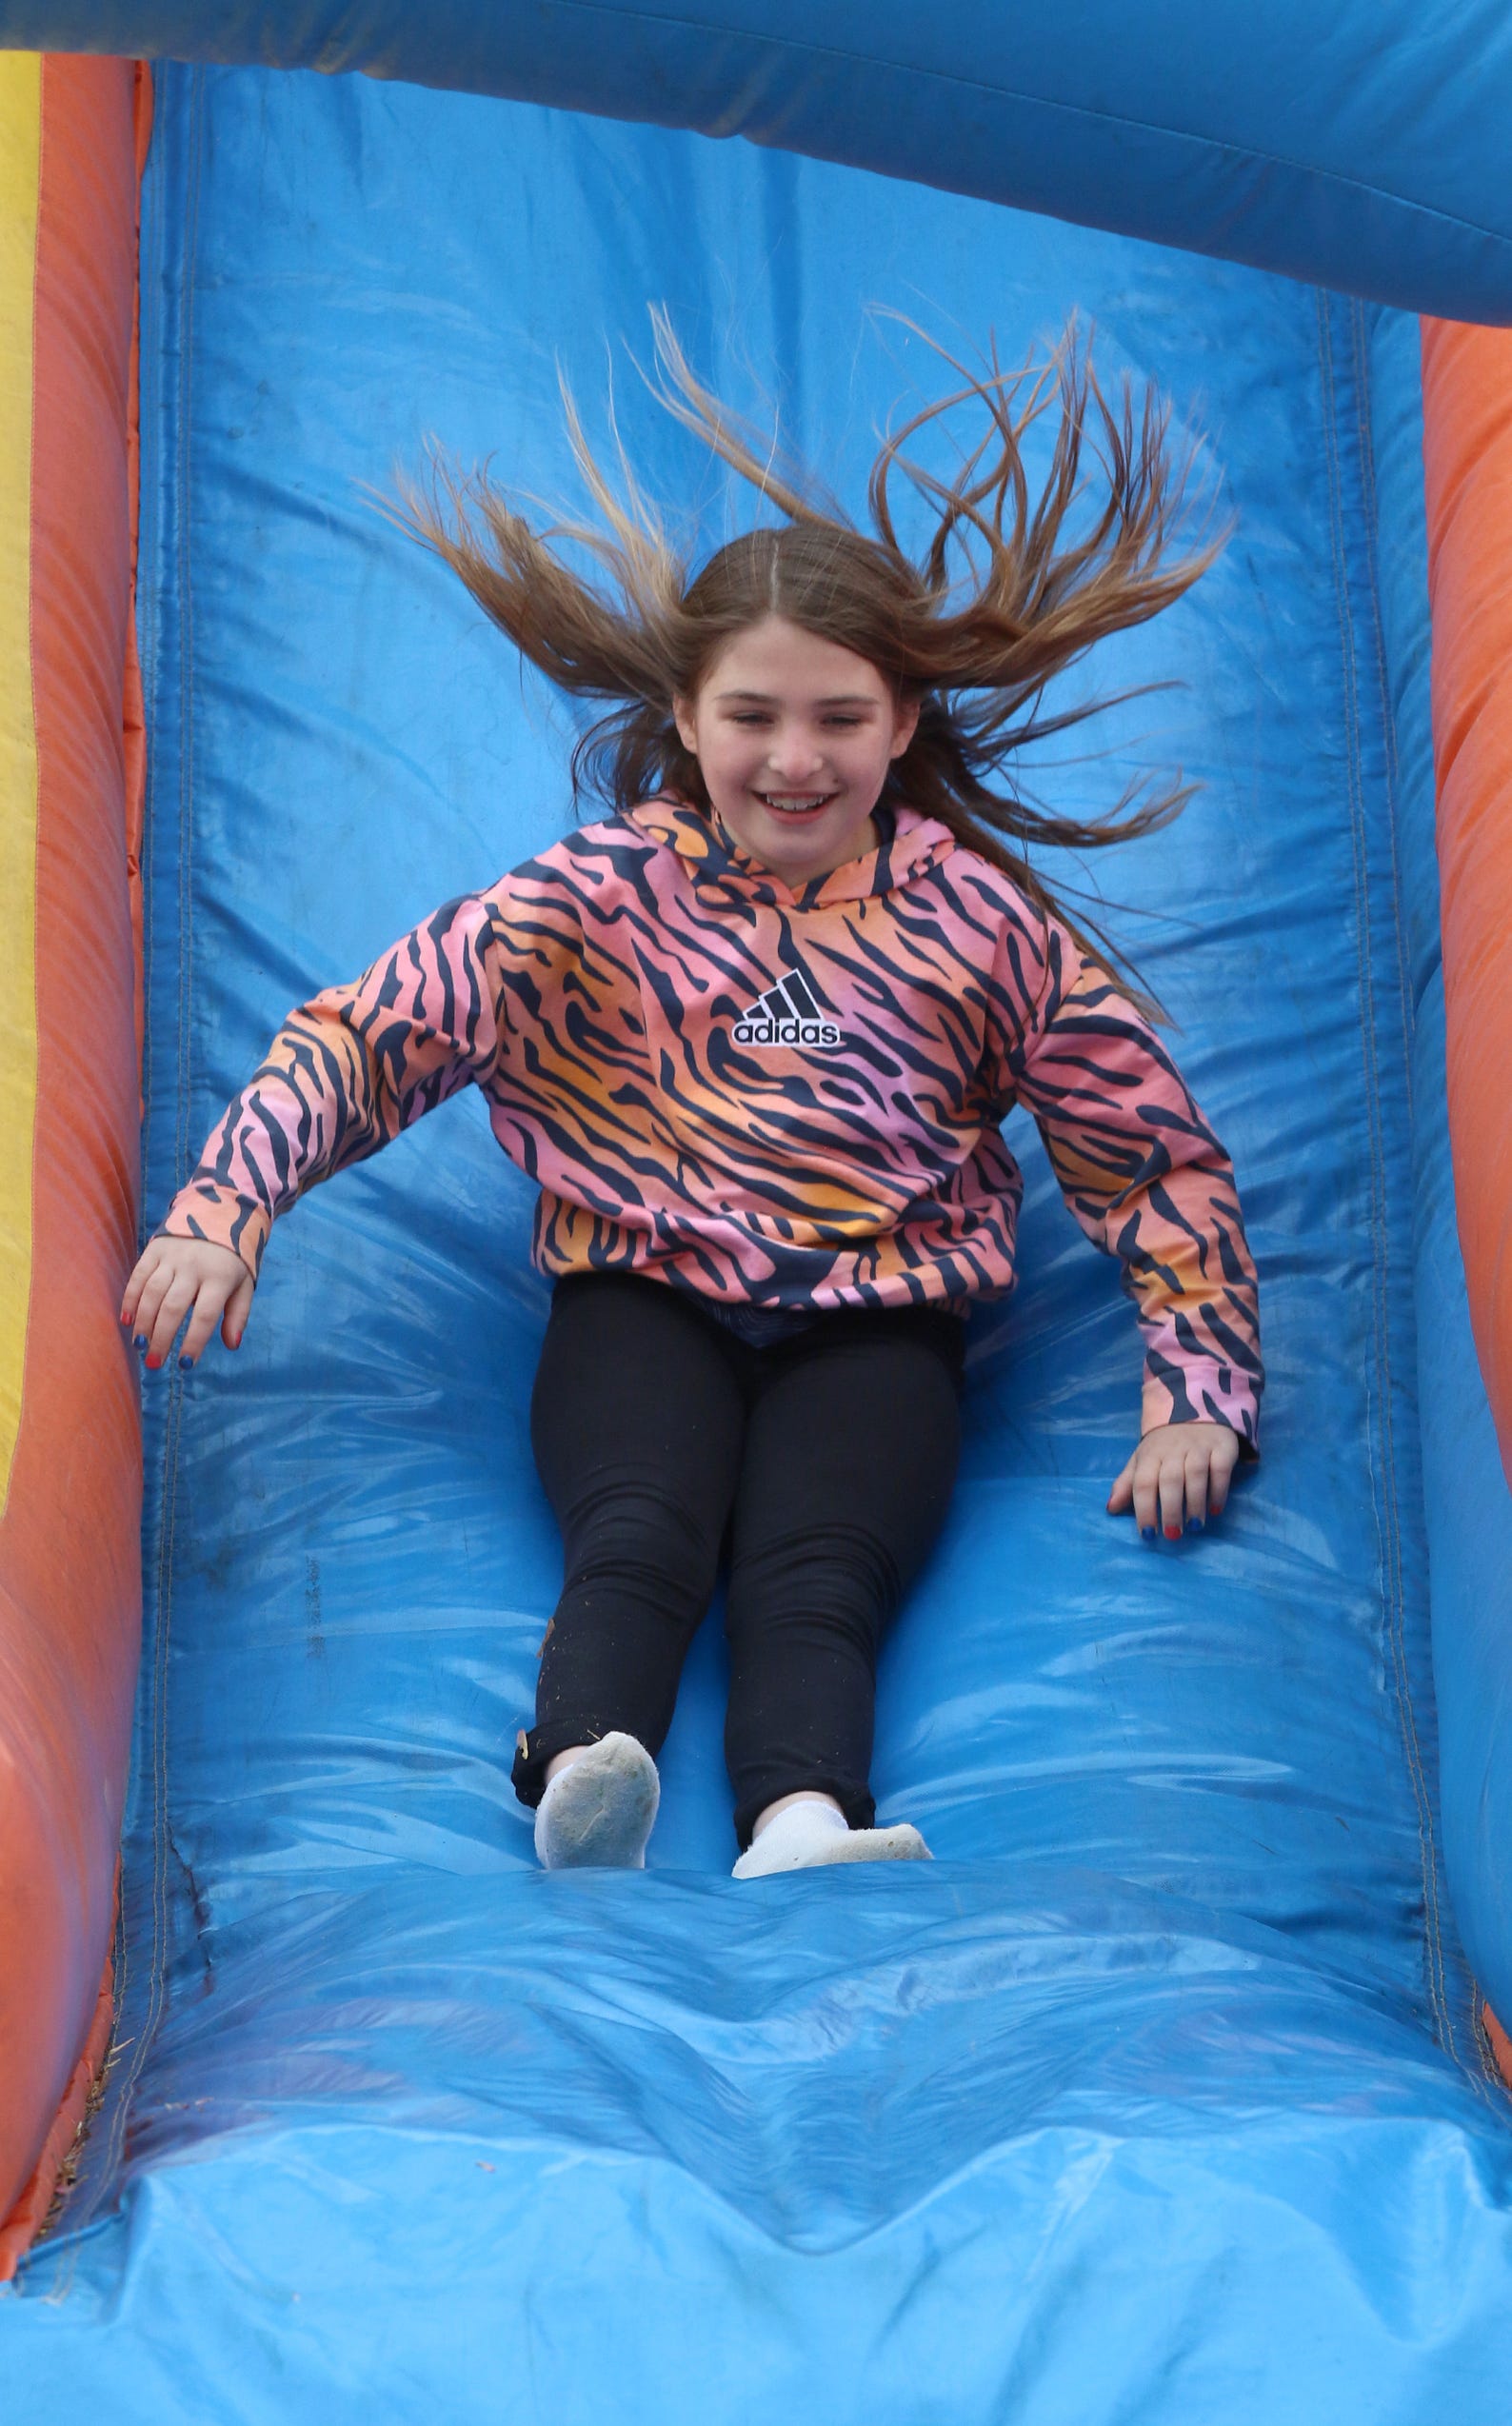 Nine-year-old Olivia Grzonka has fun on the inflatable slide during the Honey Hunters Community Day held Saturday, April 9, 2022, at CaroMont Health Park.